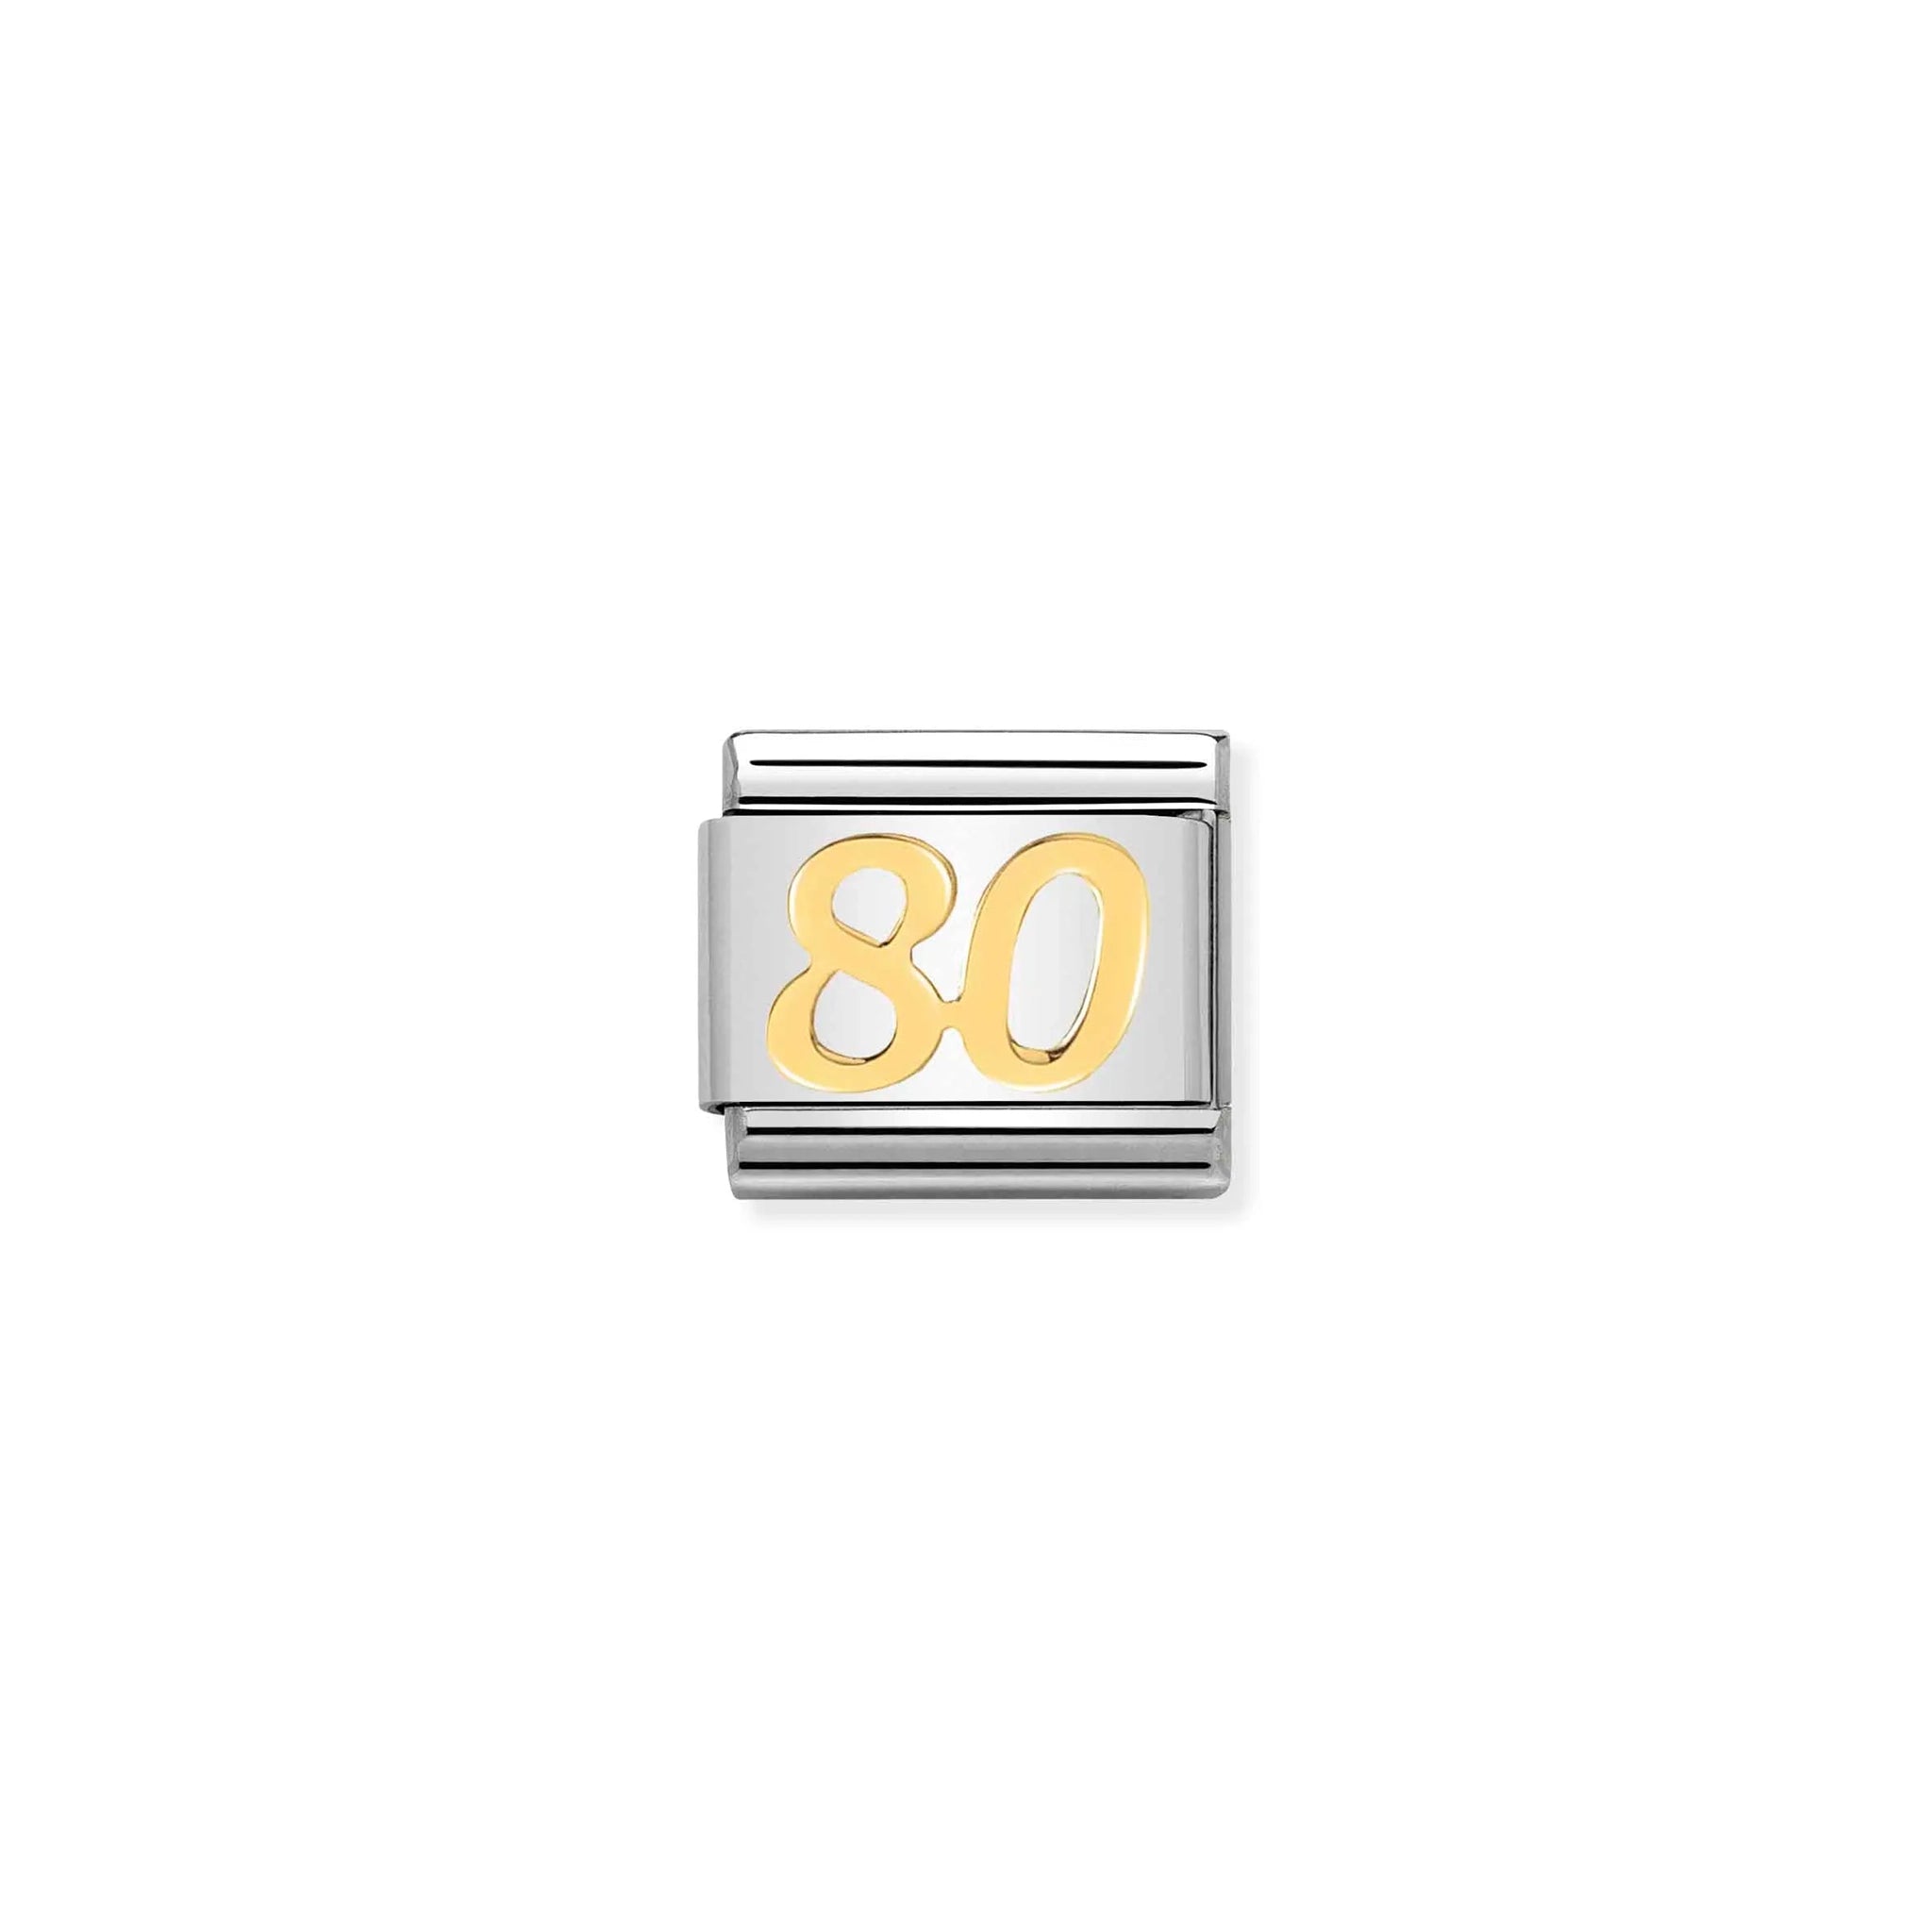 A Nomination charm link featuring a plain gold number 80